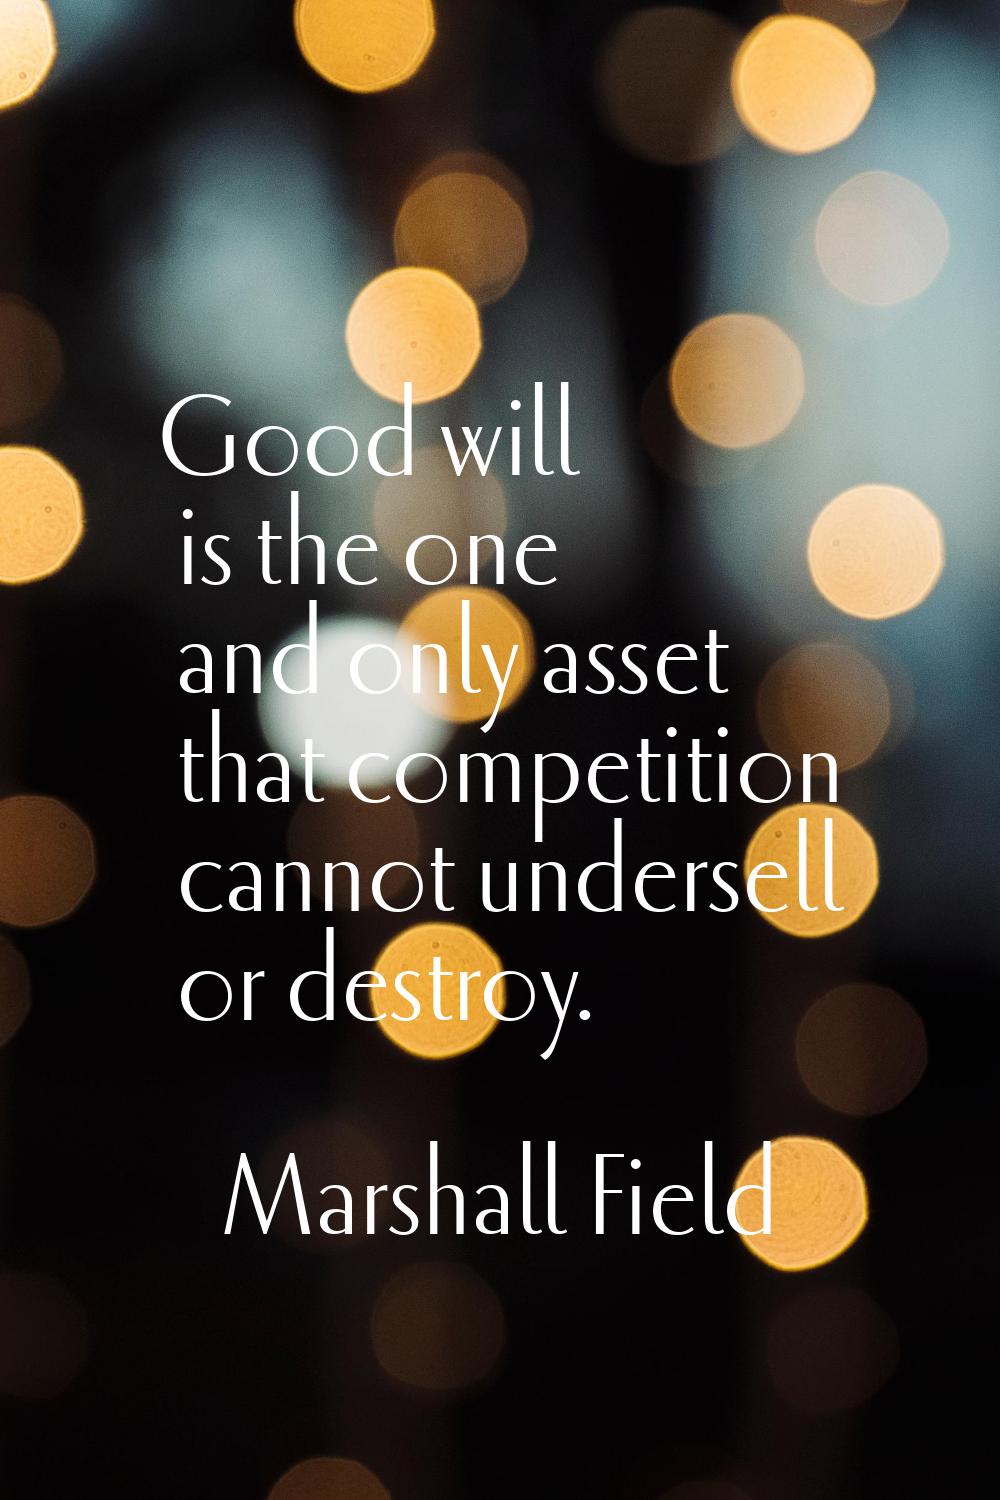 Good will is the one and only asset that competition cannot undersell or destroy.